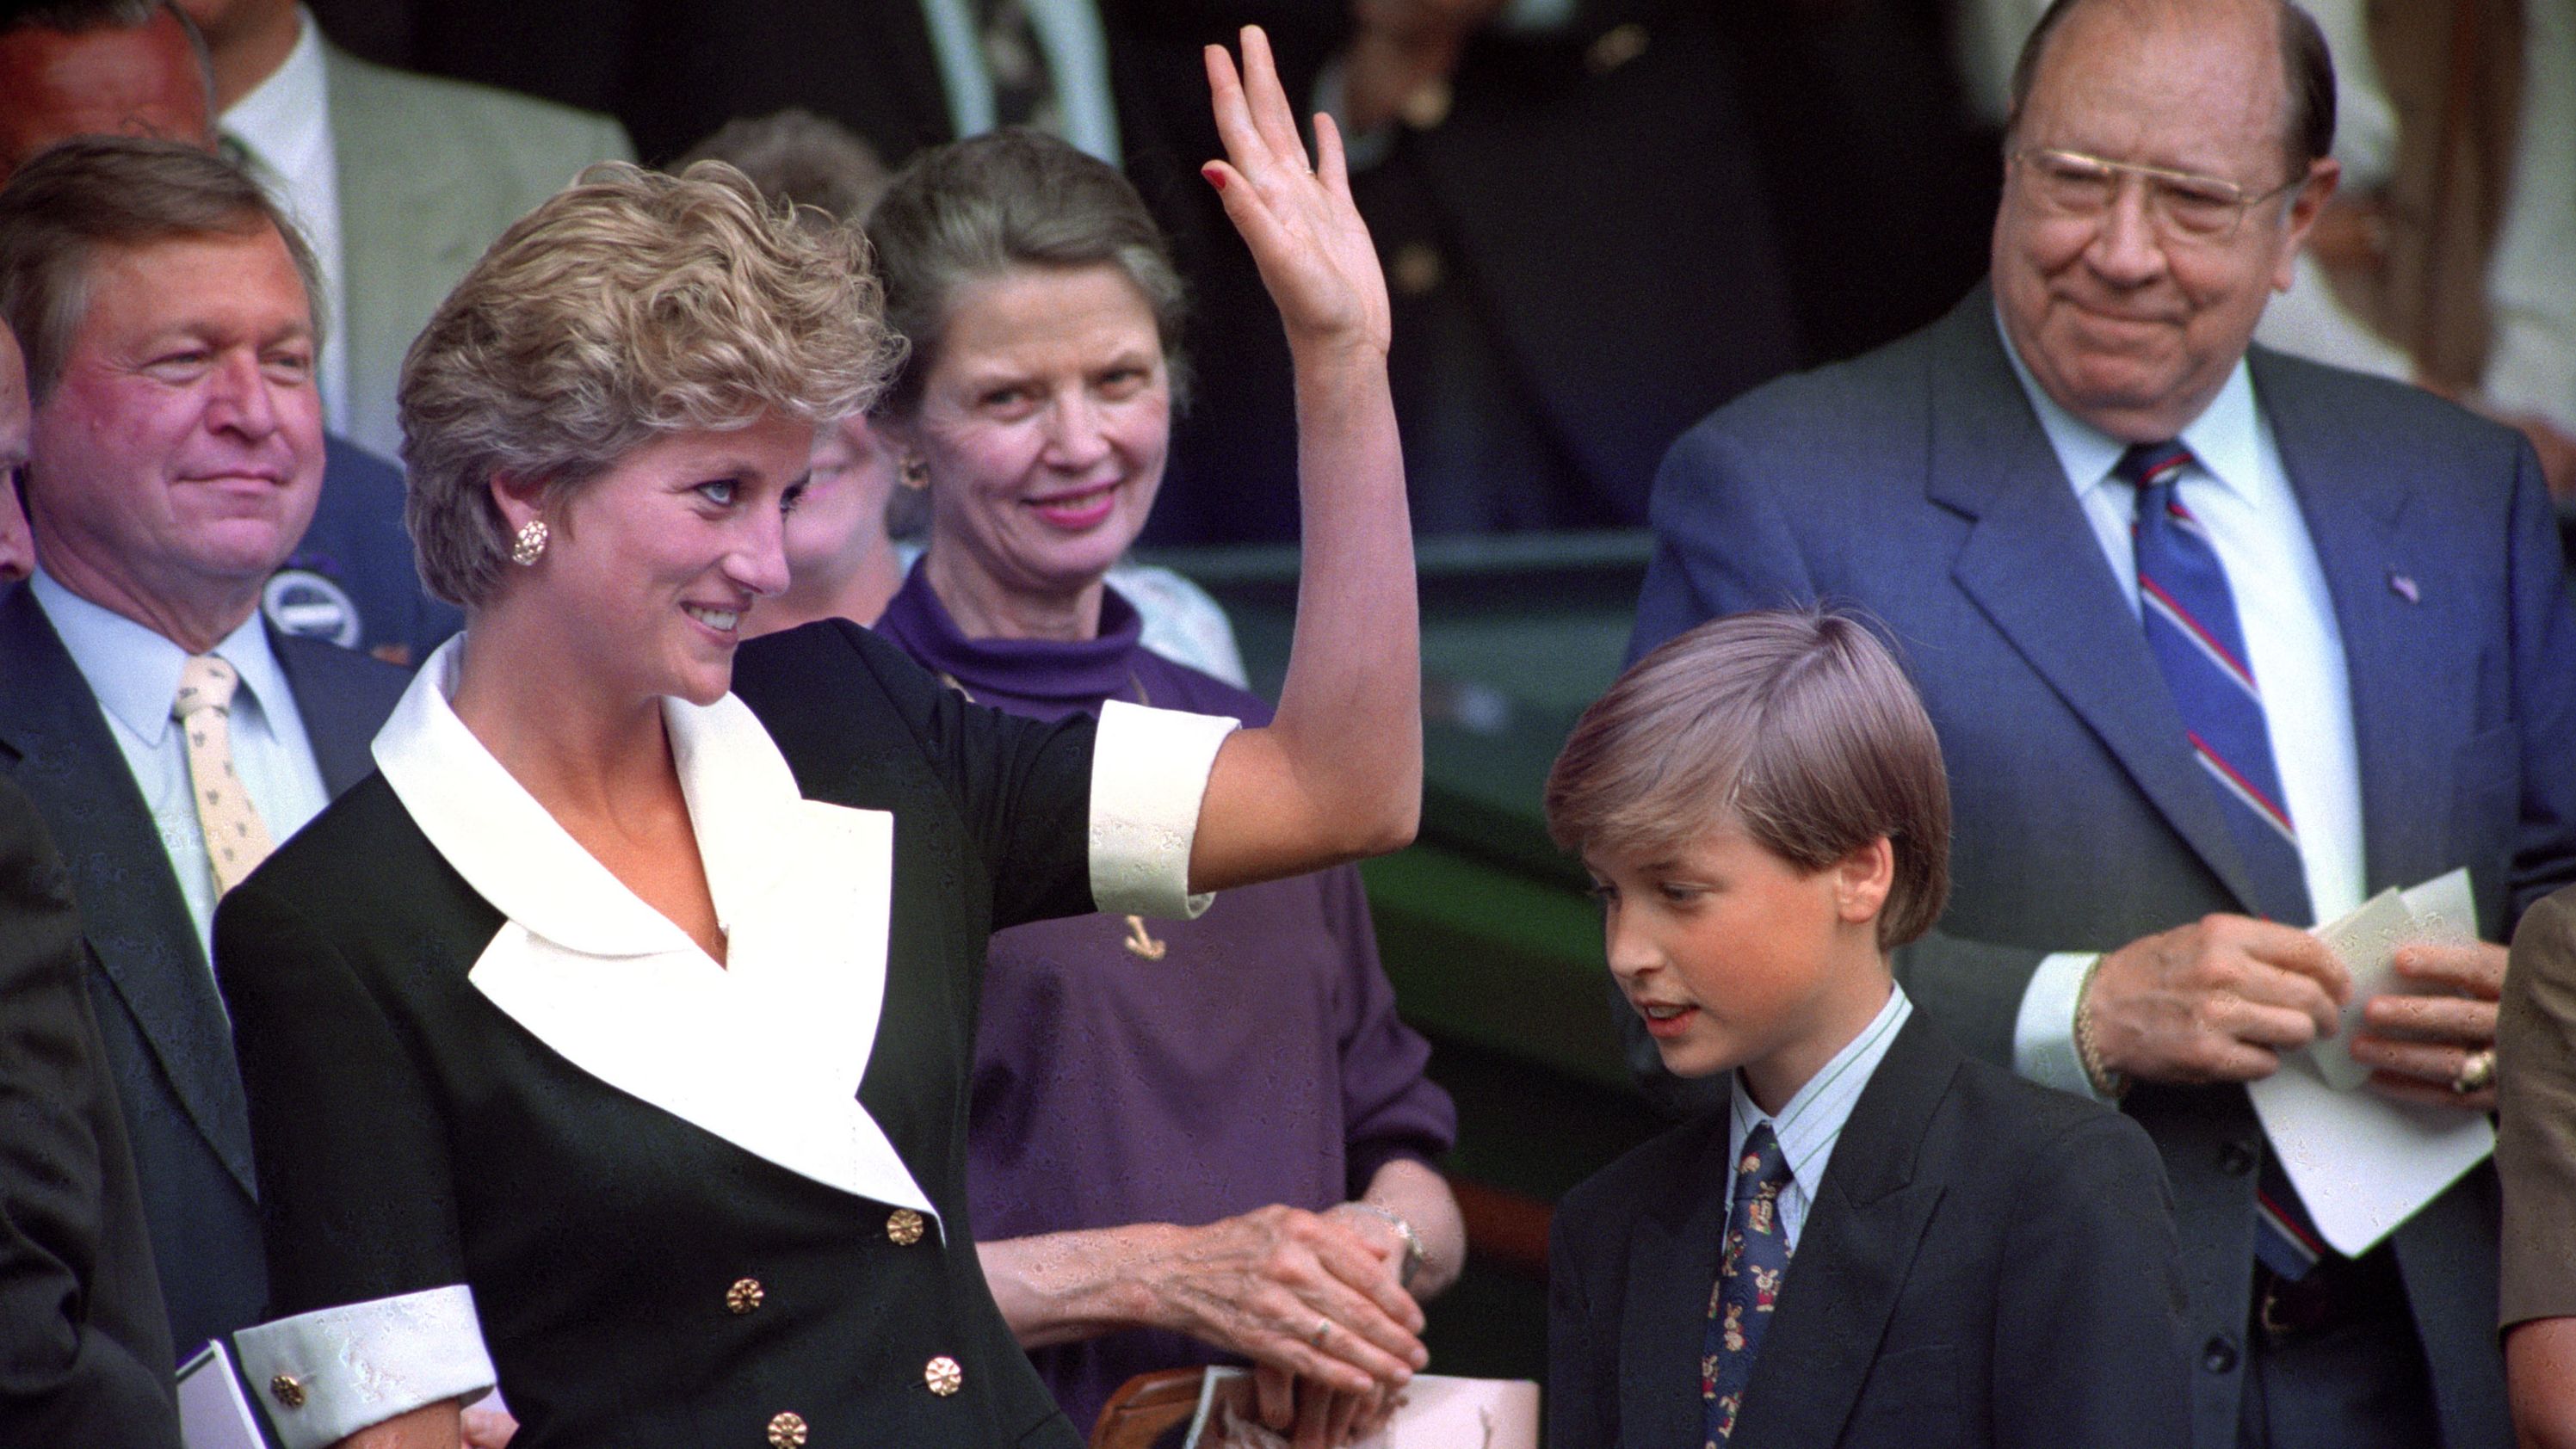 Prince William accompanies his mother to a tennis match at Wimbledon in 1994.